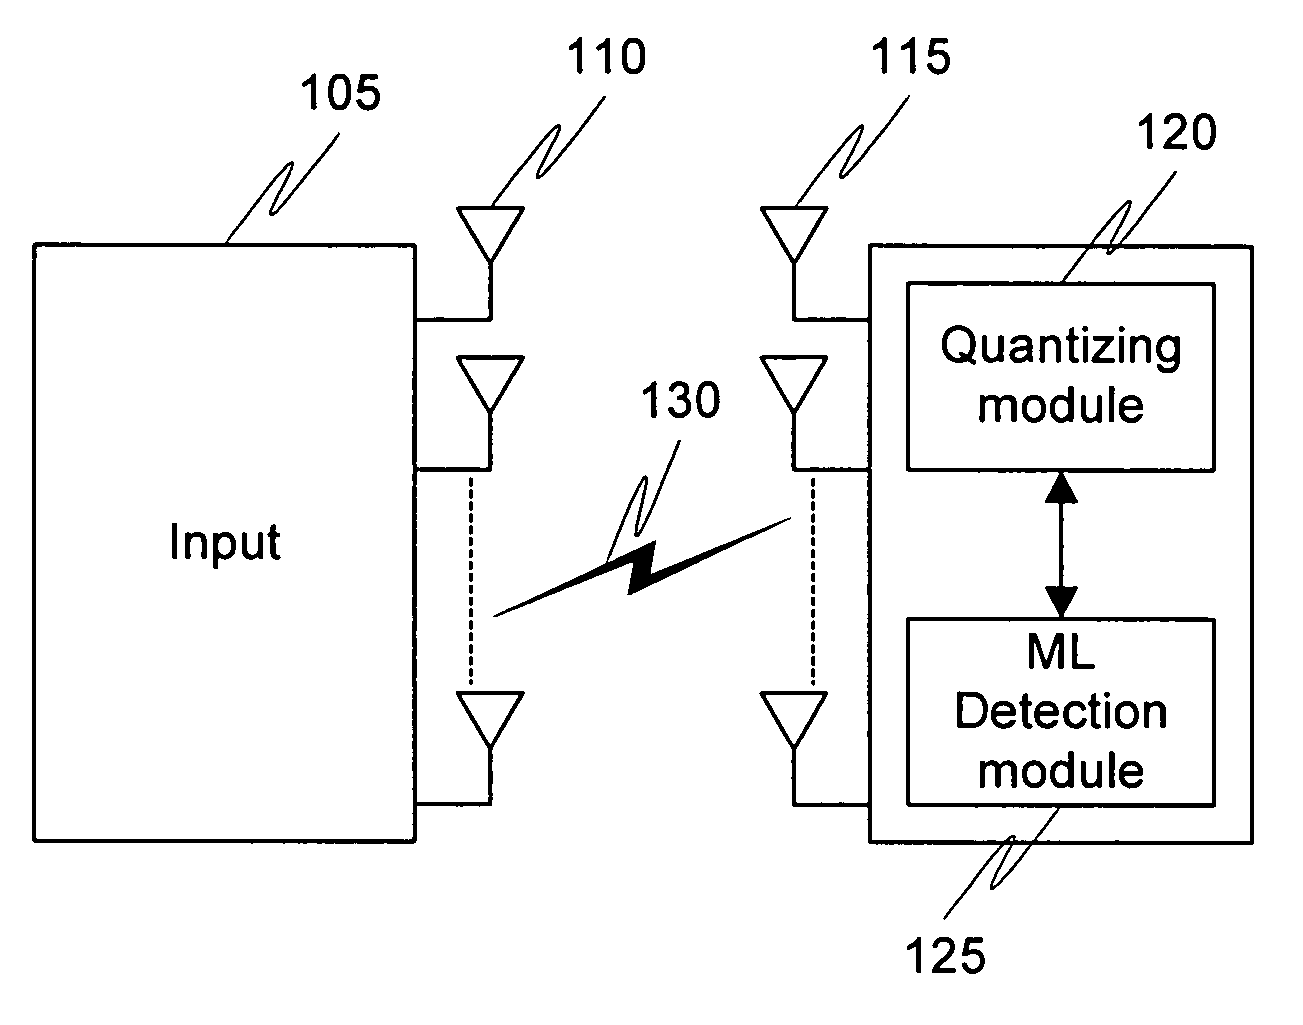 Method and system for signal detection using a reduced transmitter constellation